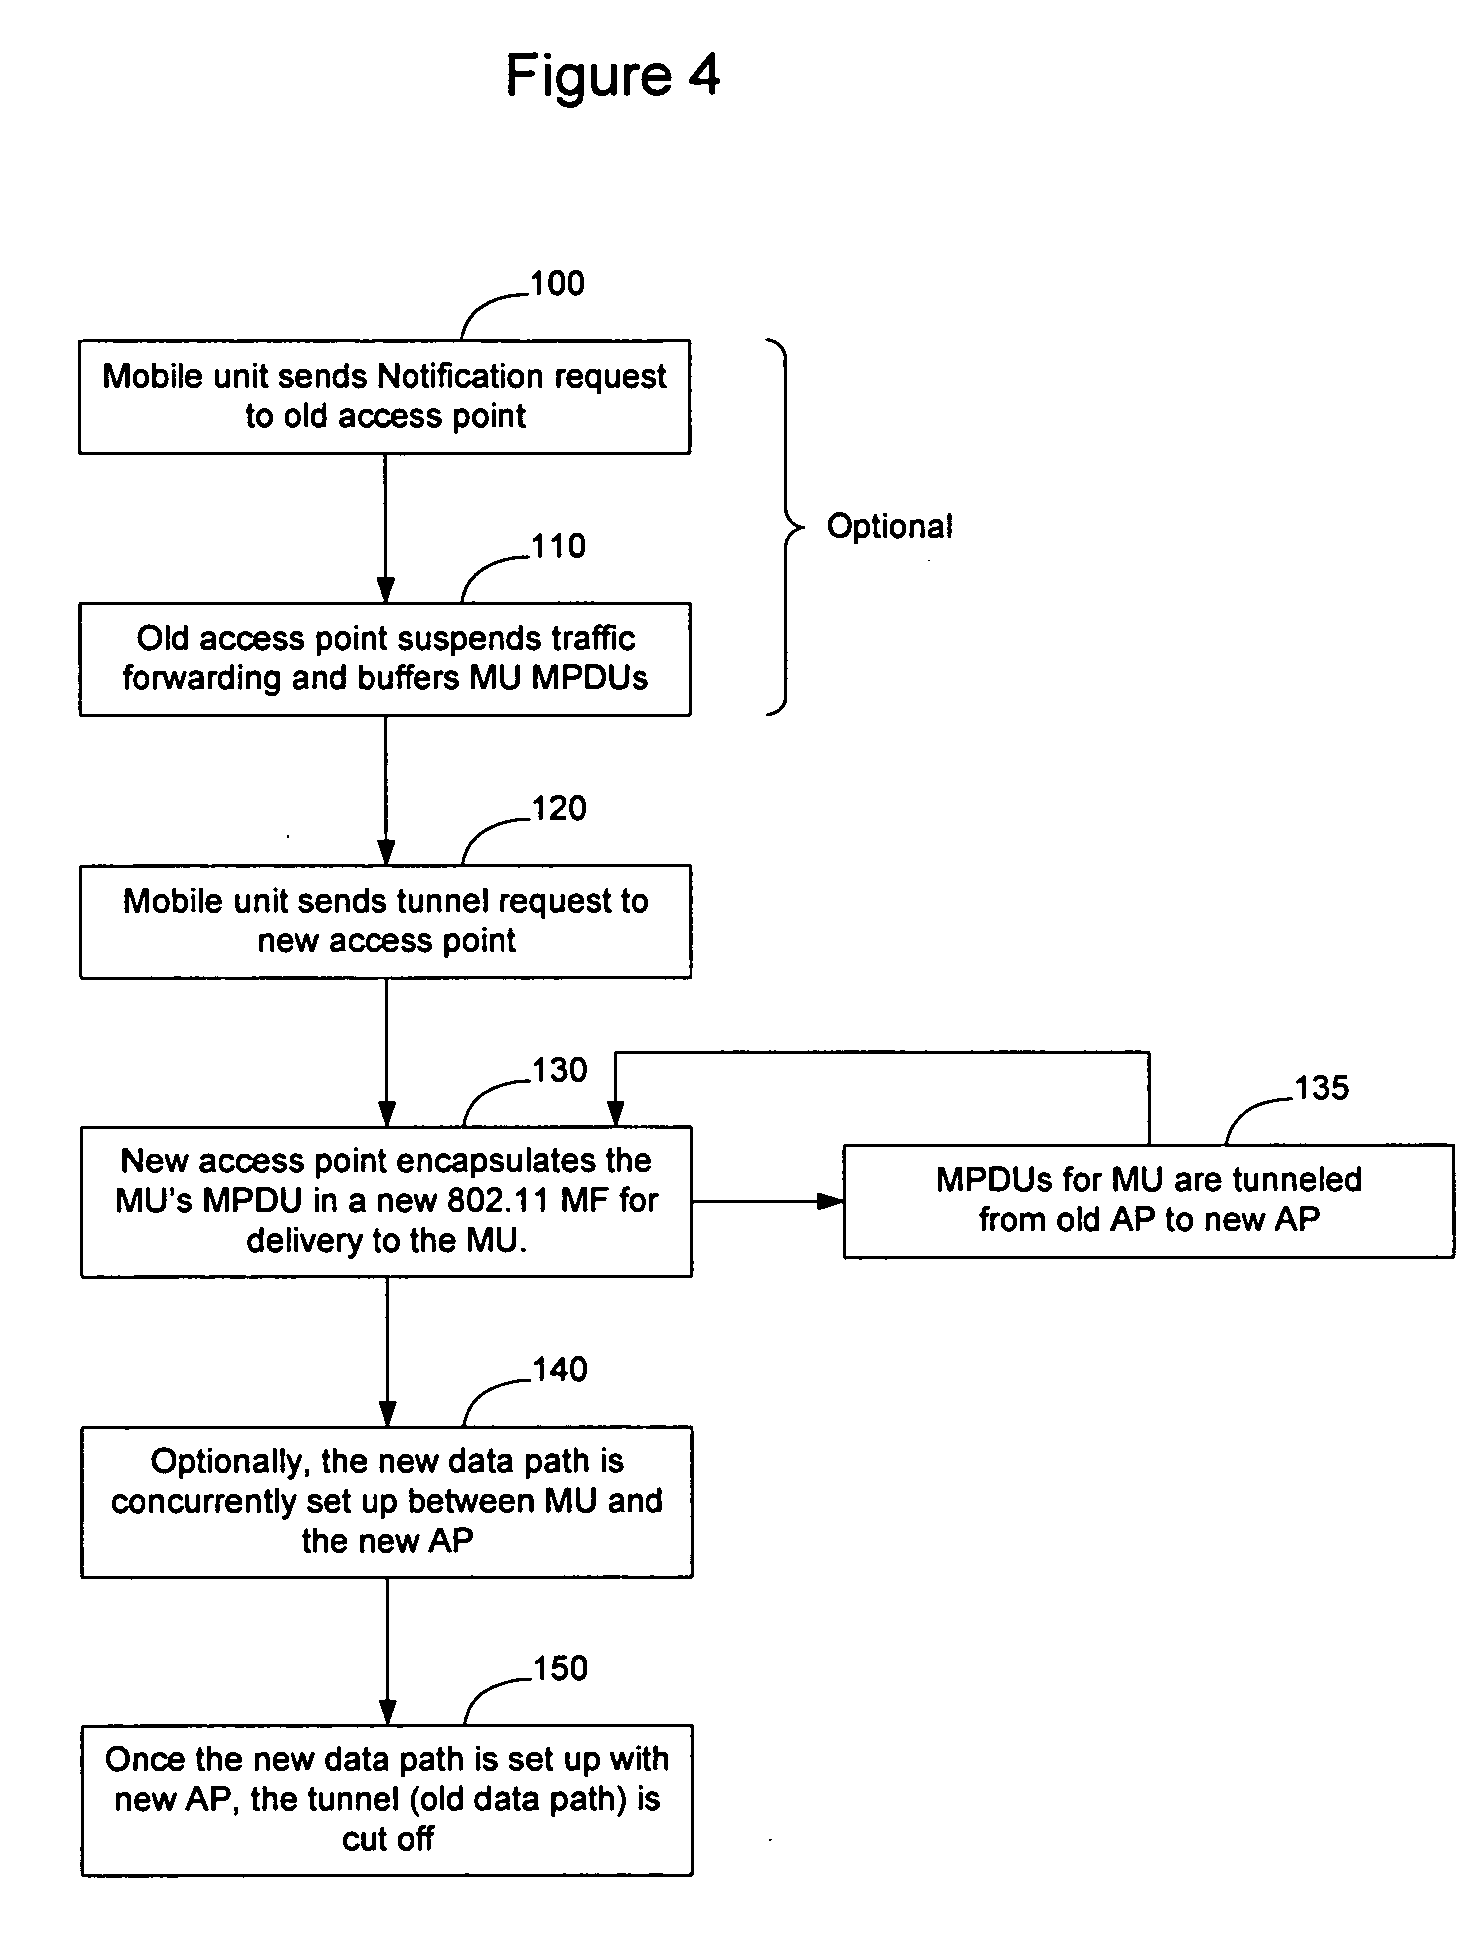 Method and apparatus for extending a mobile unit data path between access points